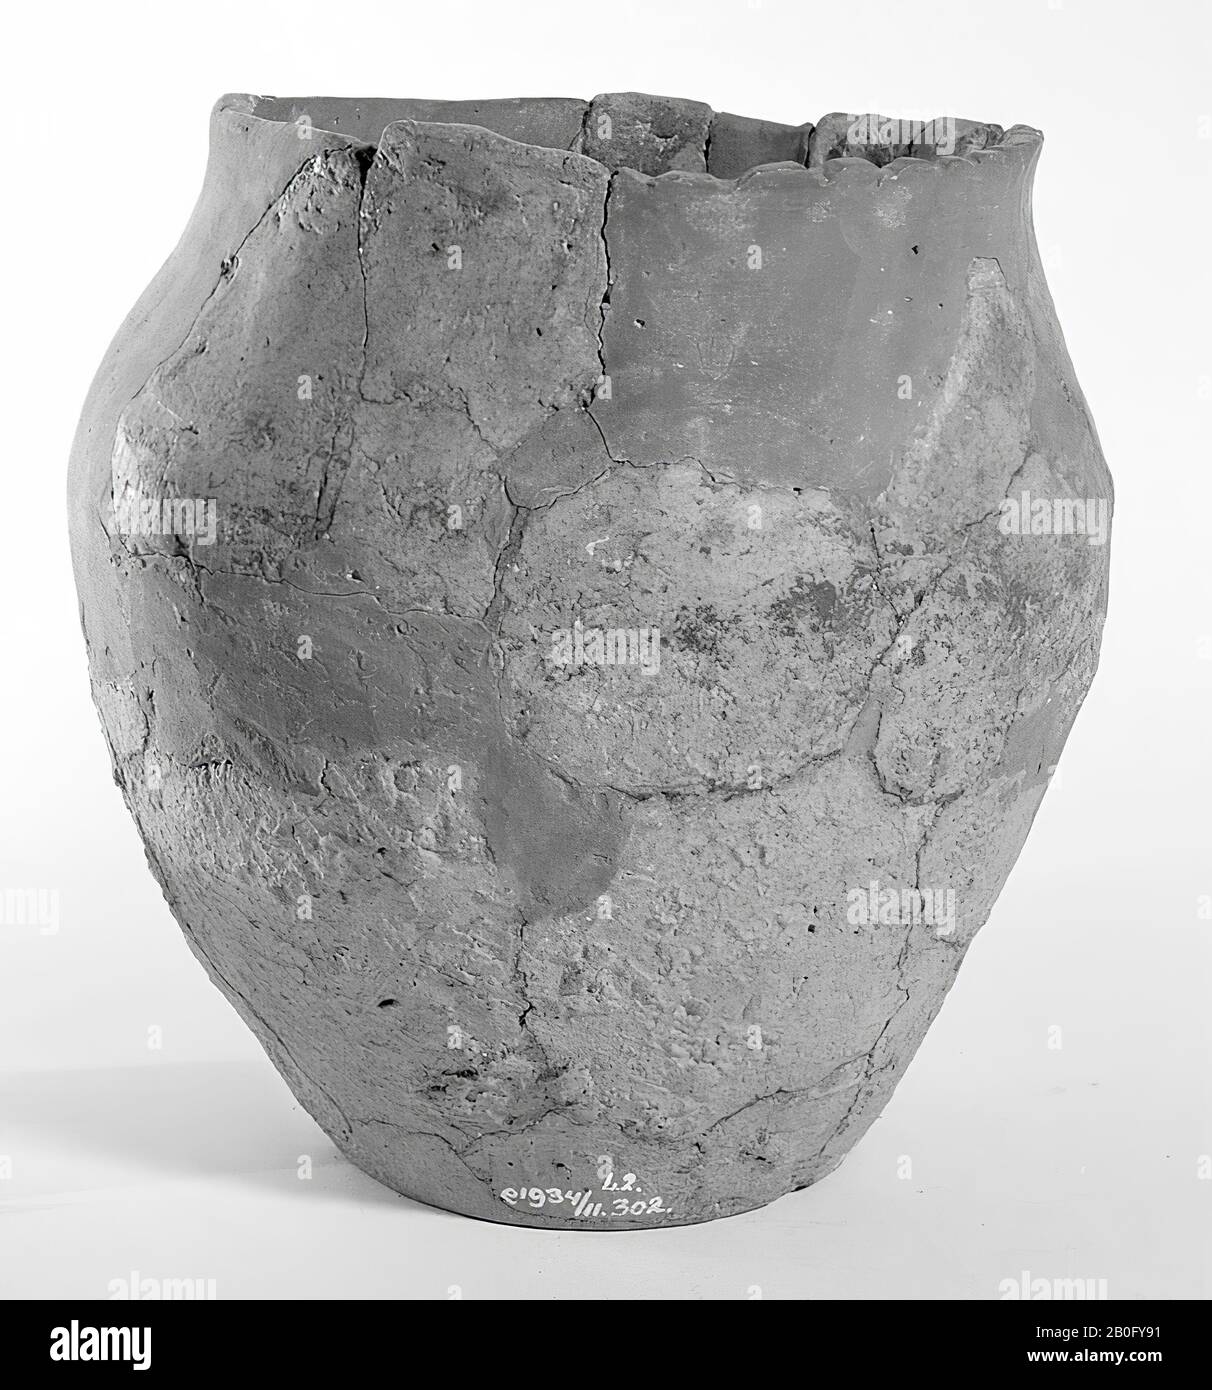 Germanic urn of earthenware with serrated edge. Old unstable bonding and additions, the edge is damaged. Contains cremated residues, urn, earthenware, h: 18.1 cm, diam: 17 cm, prehistory -800 Stock Photo